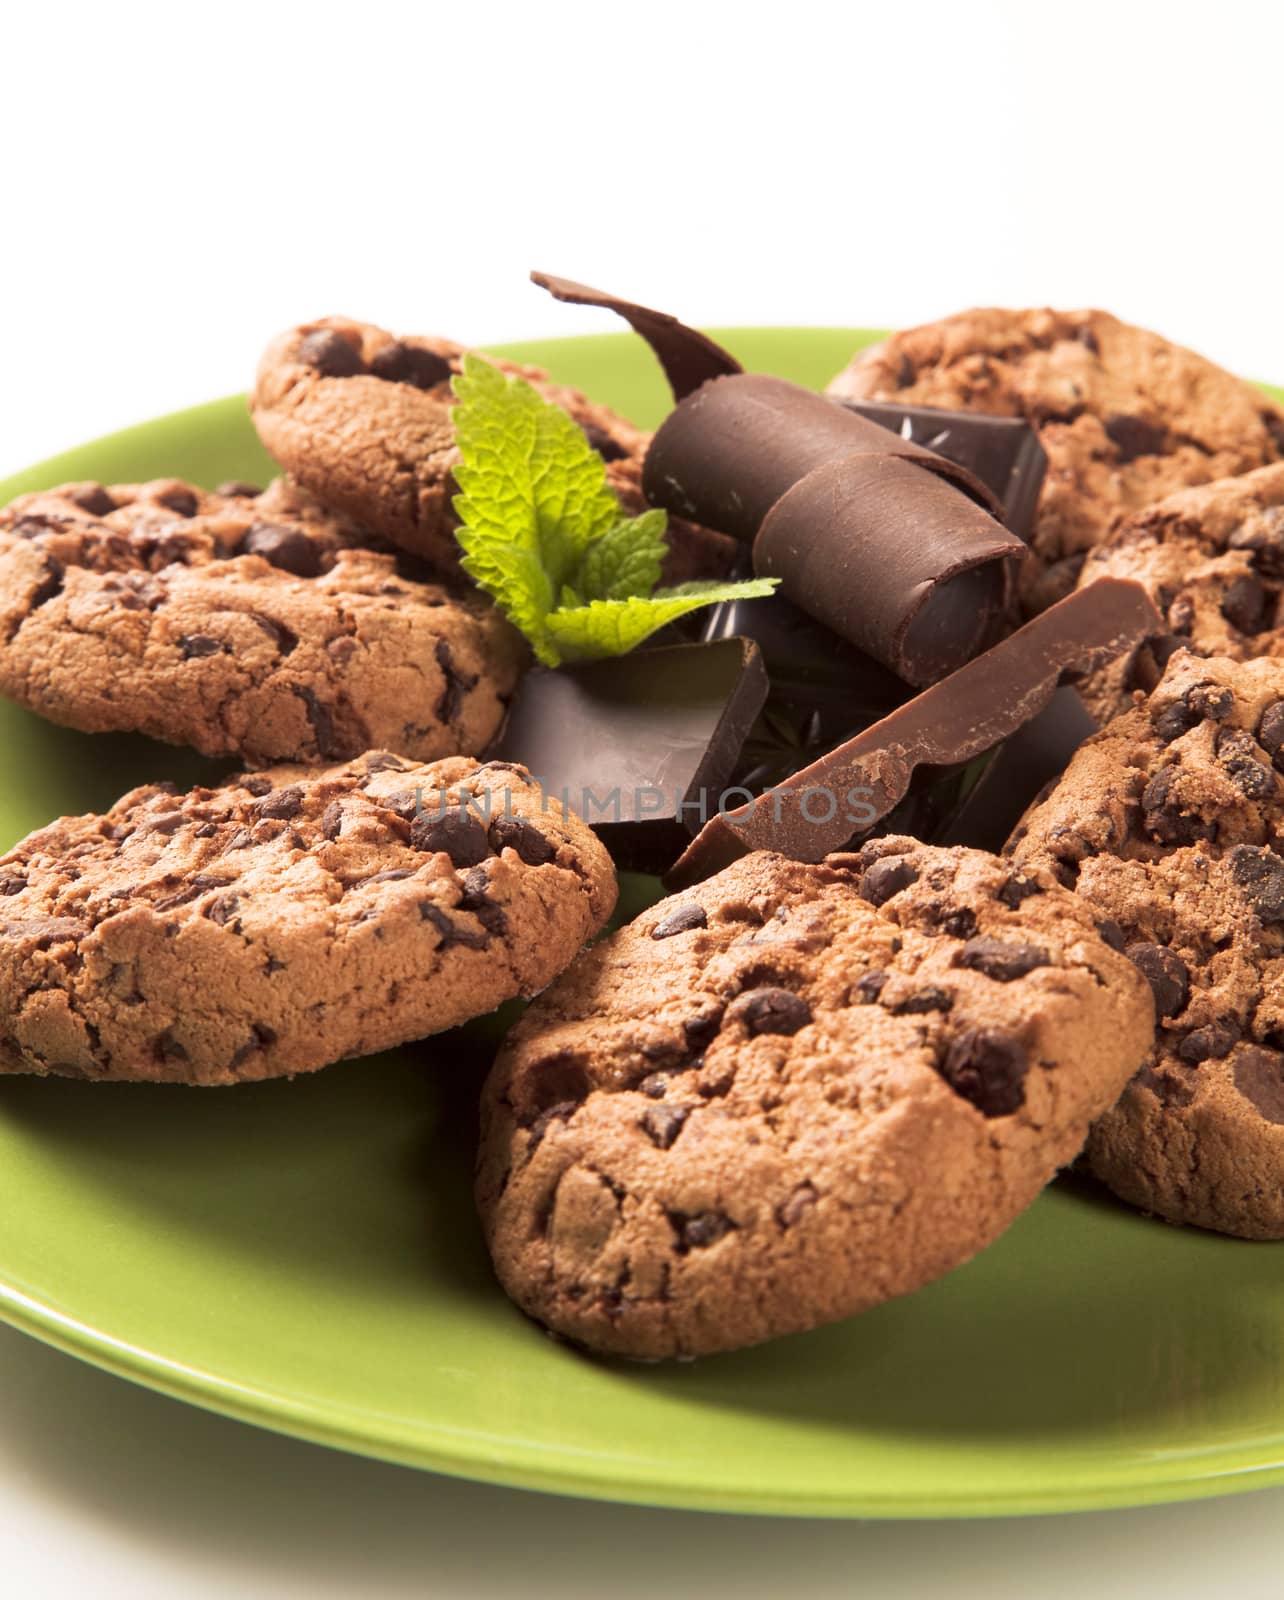 Chocolate chip cookies on a green plate 